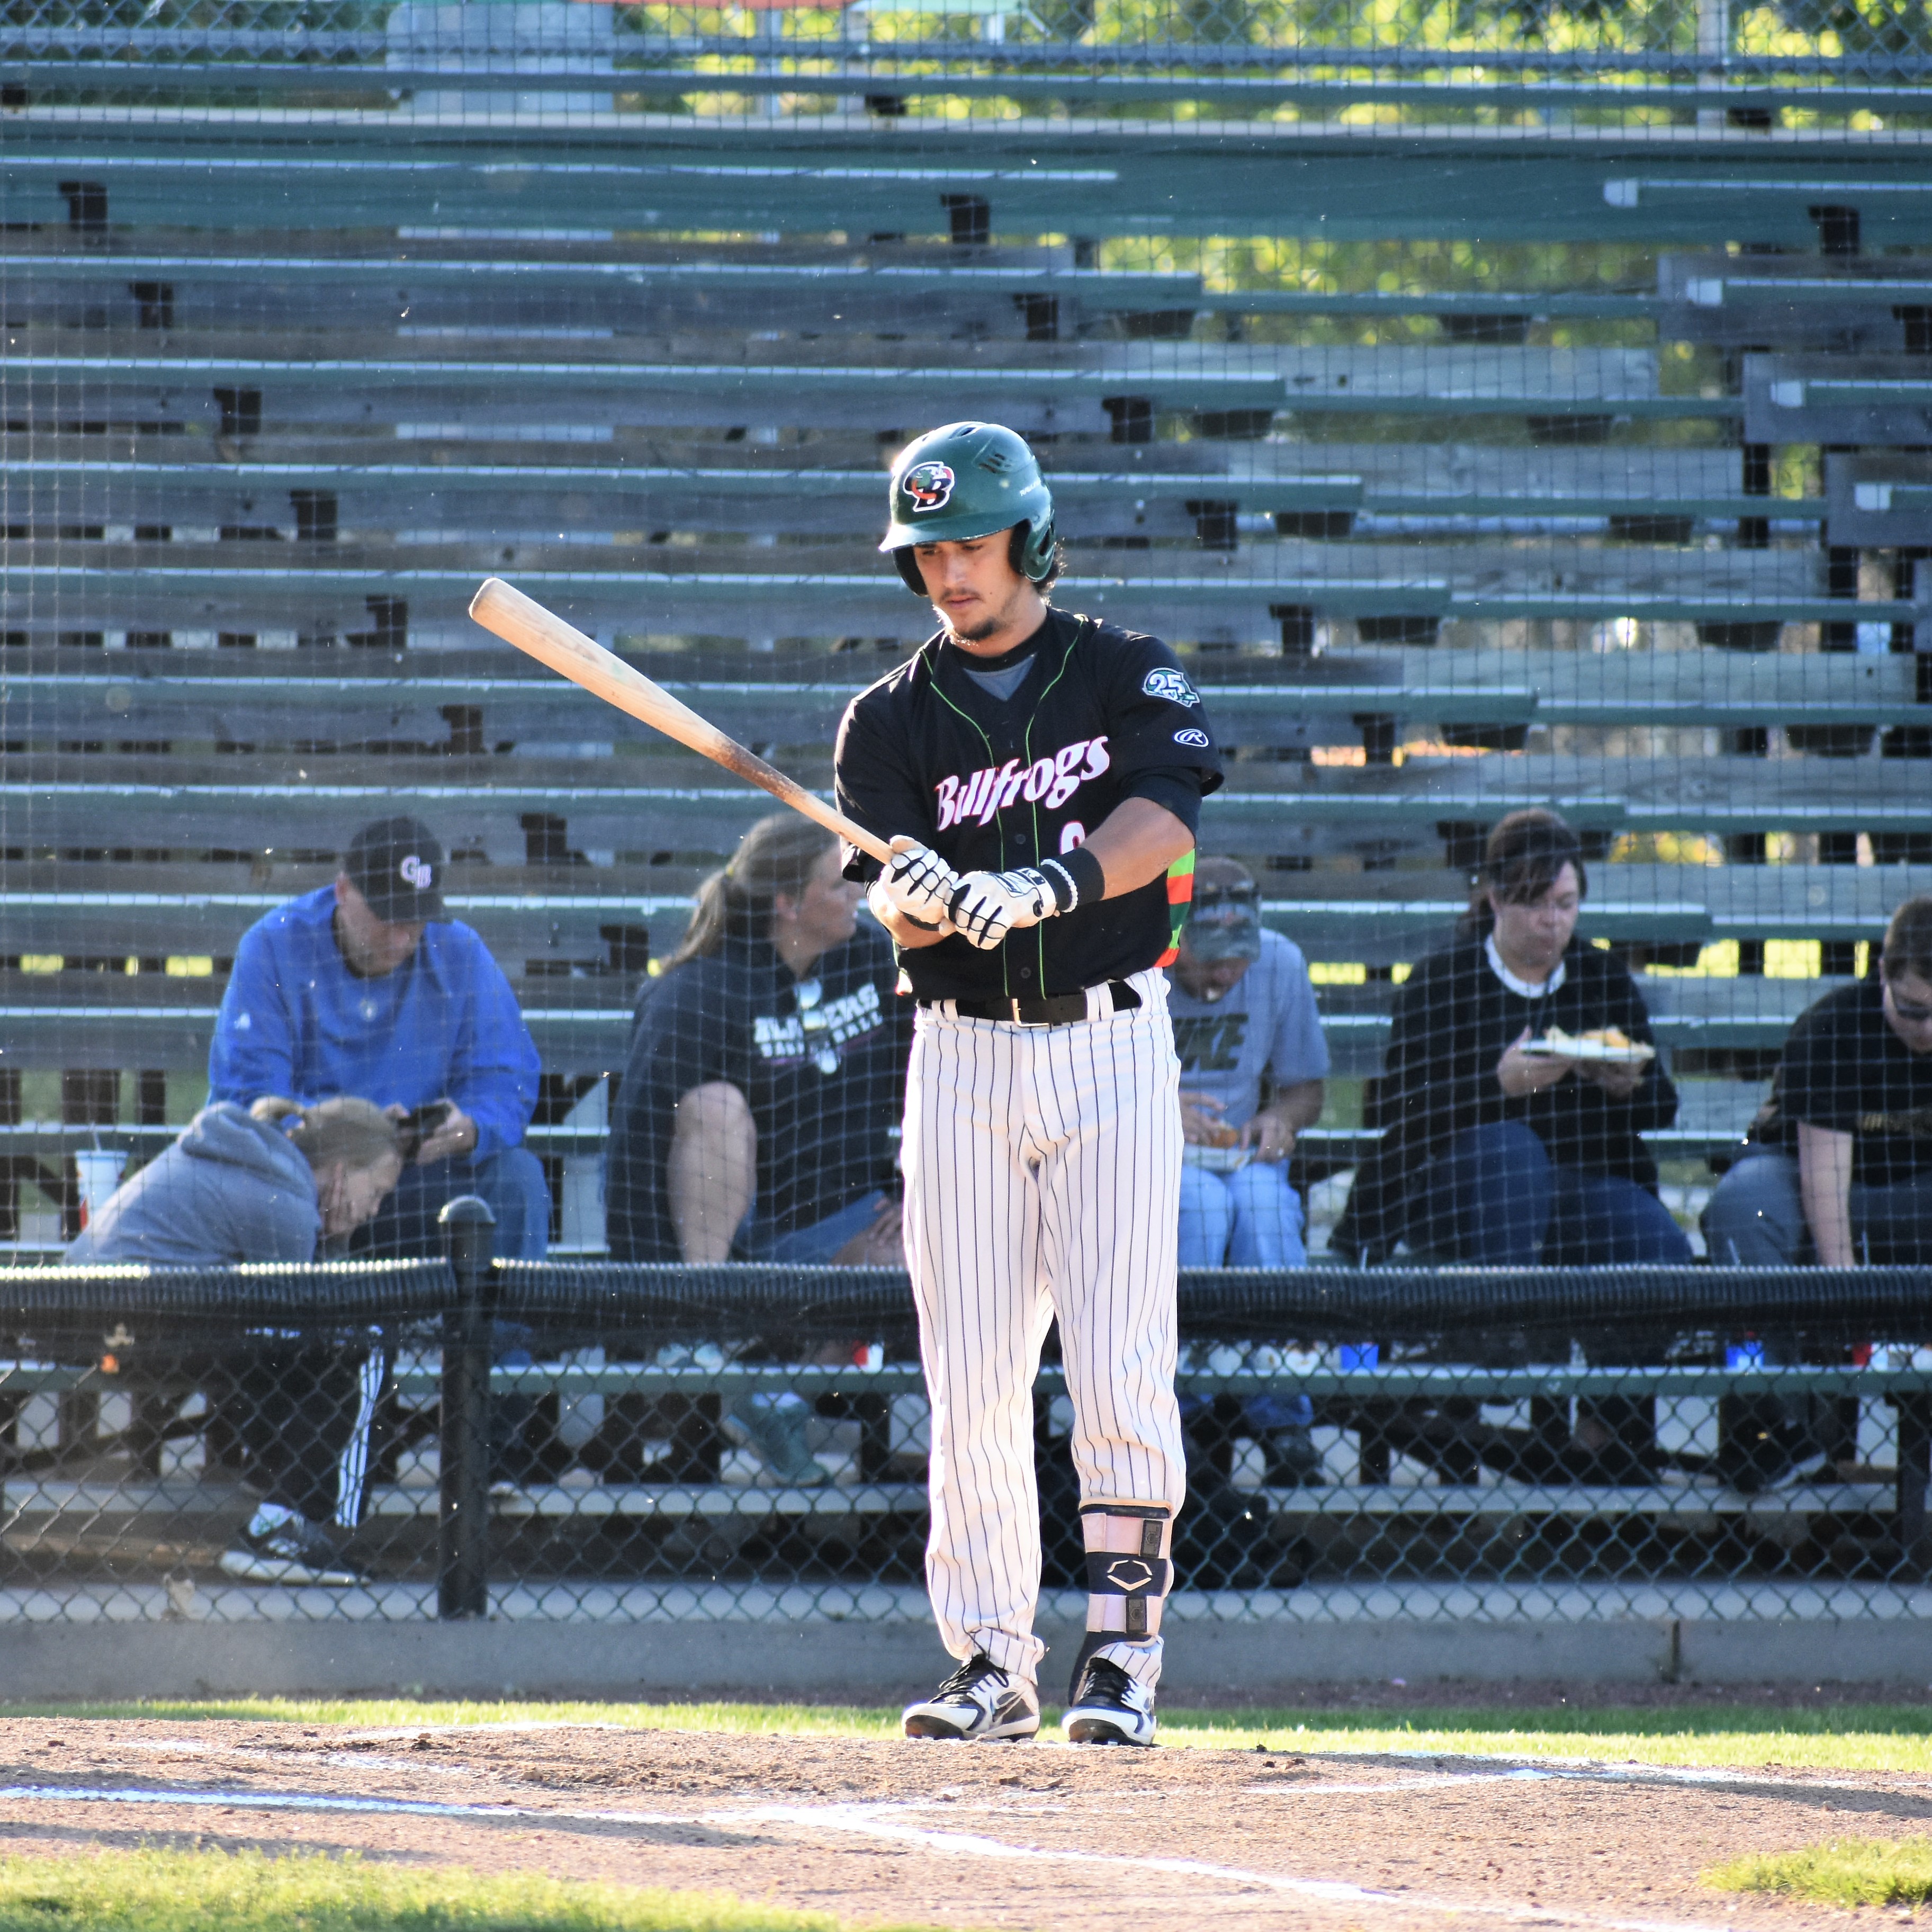 Bullfrogs can’t hold lead in loss to Rivets